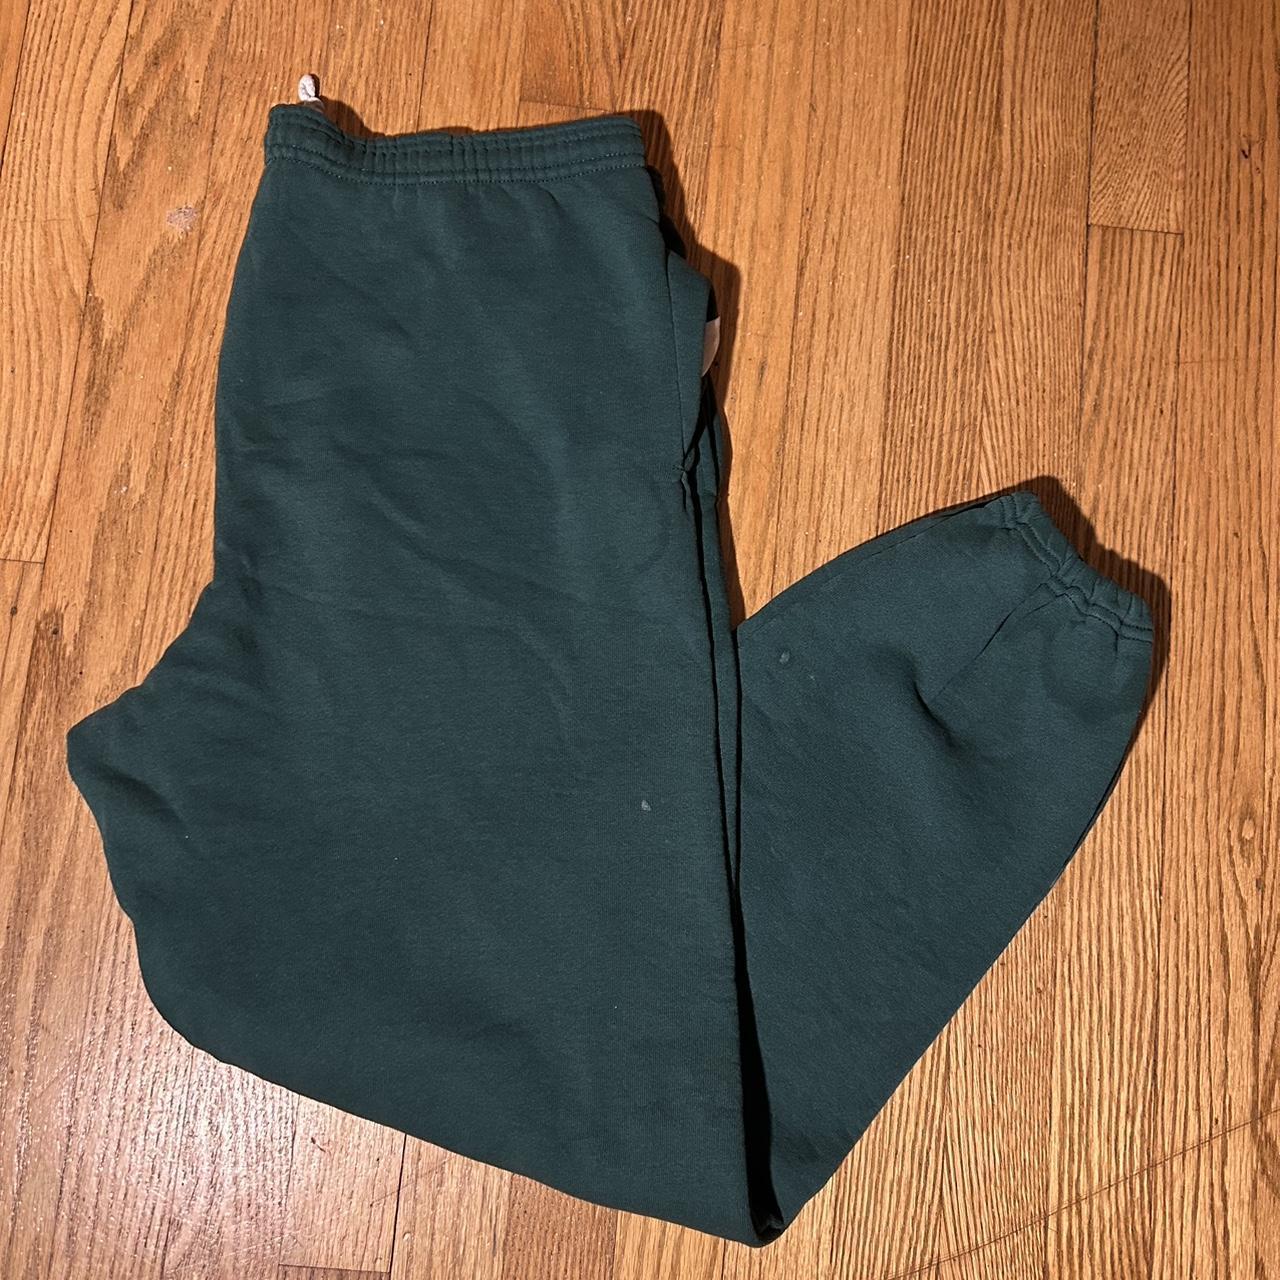 Russell Athletic green white athletic pants zipper - Depop